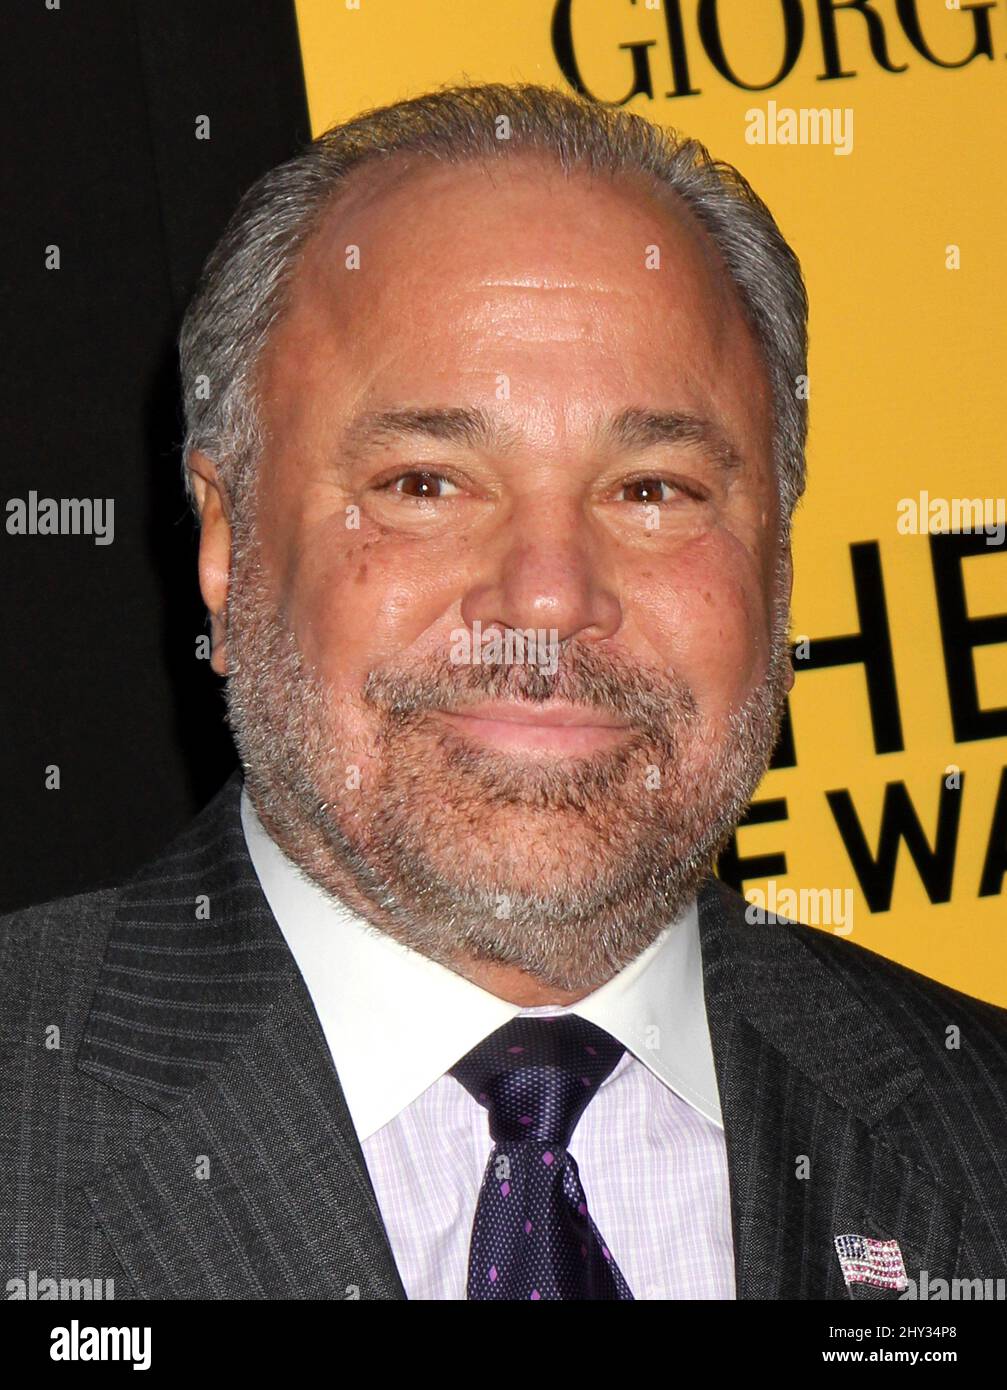 Bo Dietl attending the premiere of 'The Wolf of Wall Street' in New York. Stock Photo